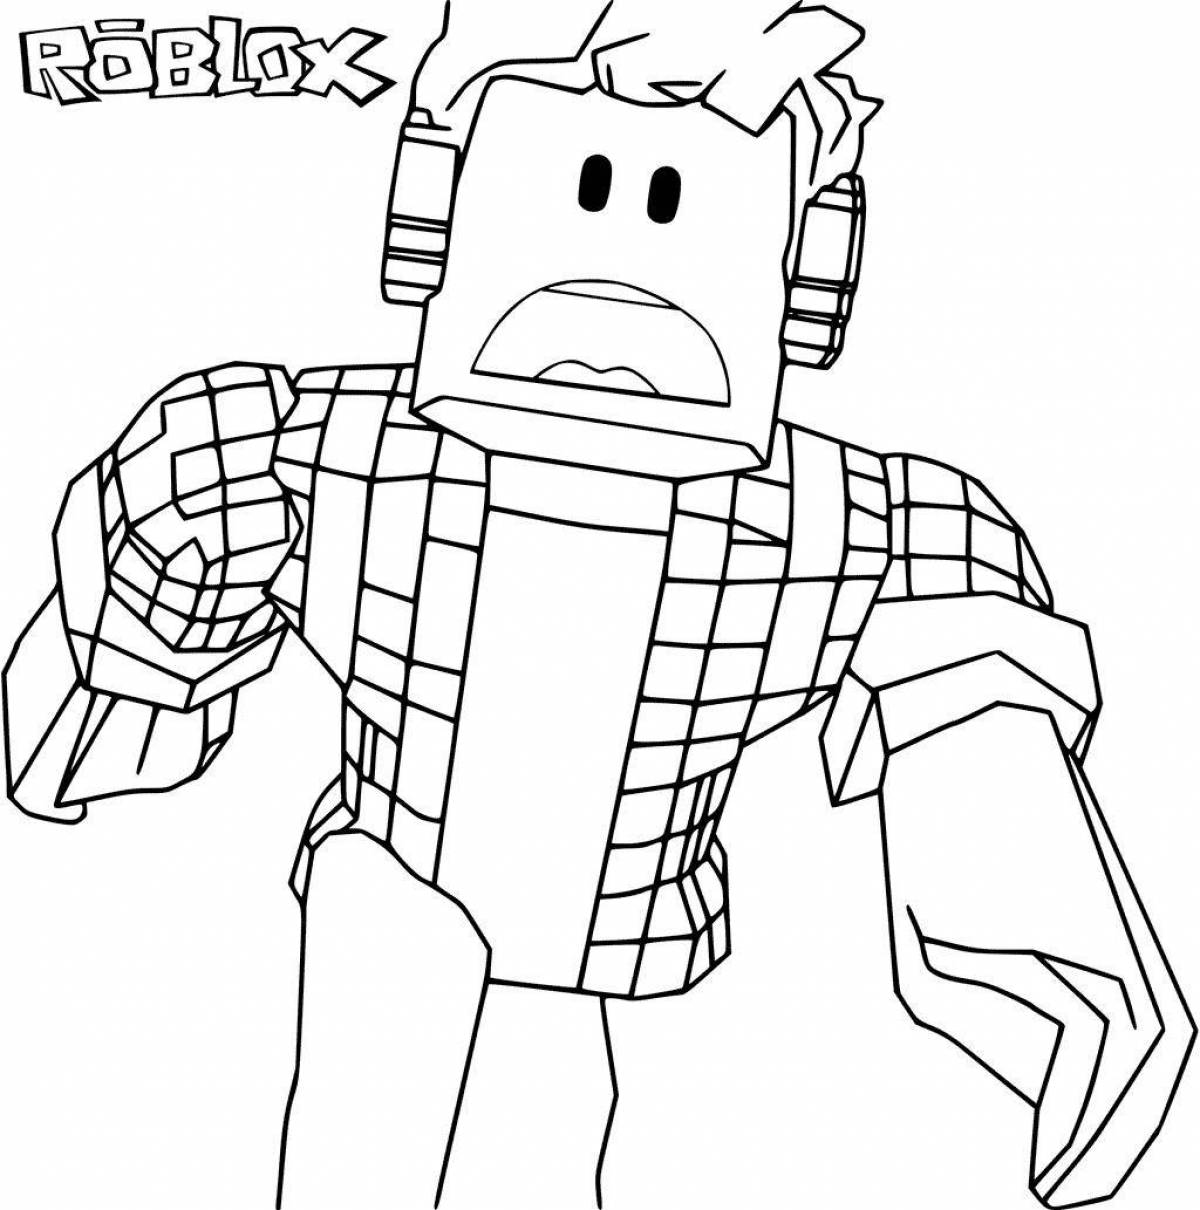 Roblox monster coloring page live